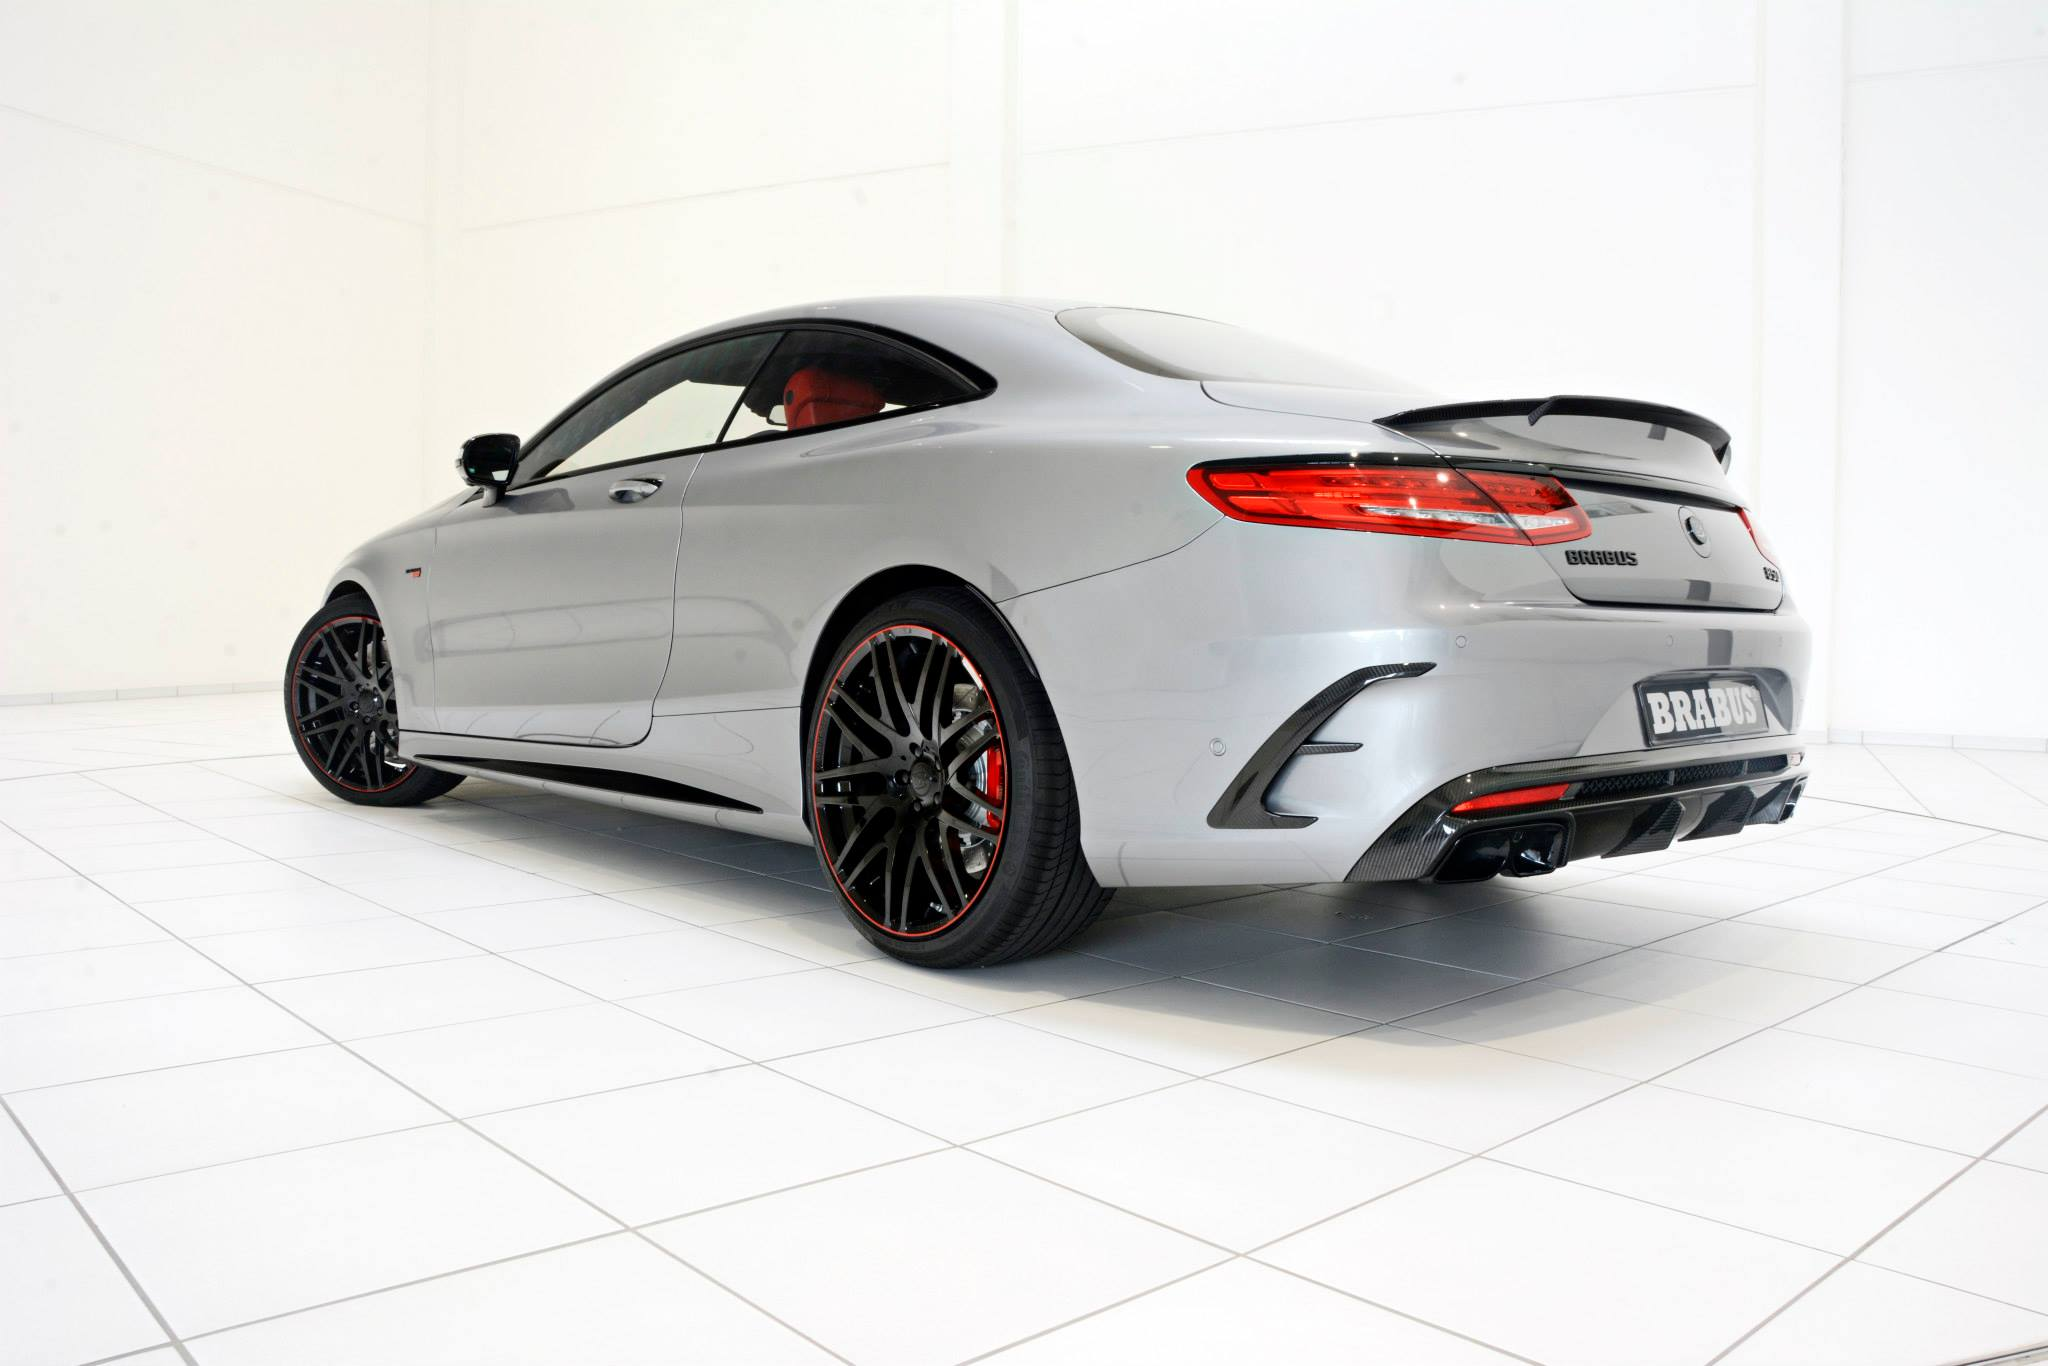 Check our price and buy the Brabus Body kit for S-class Coupe C217